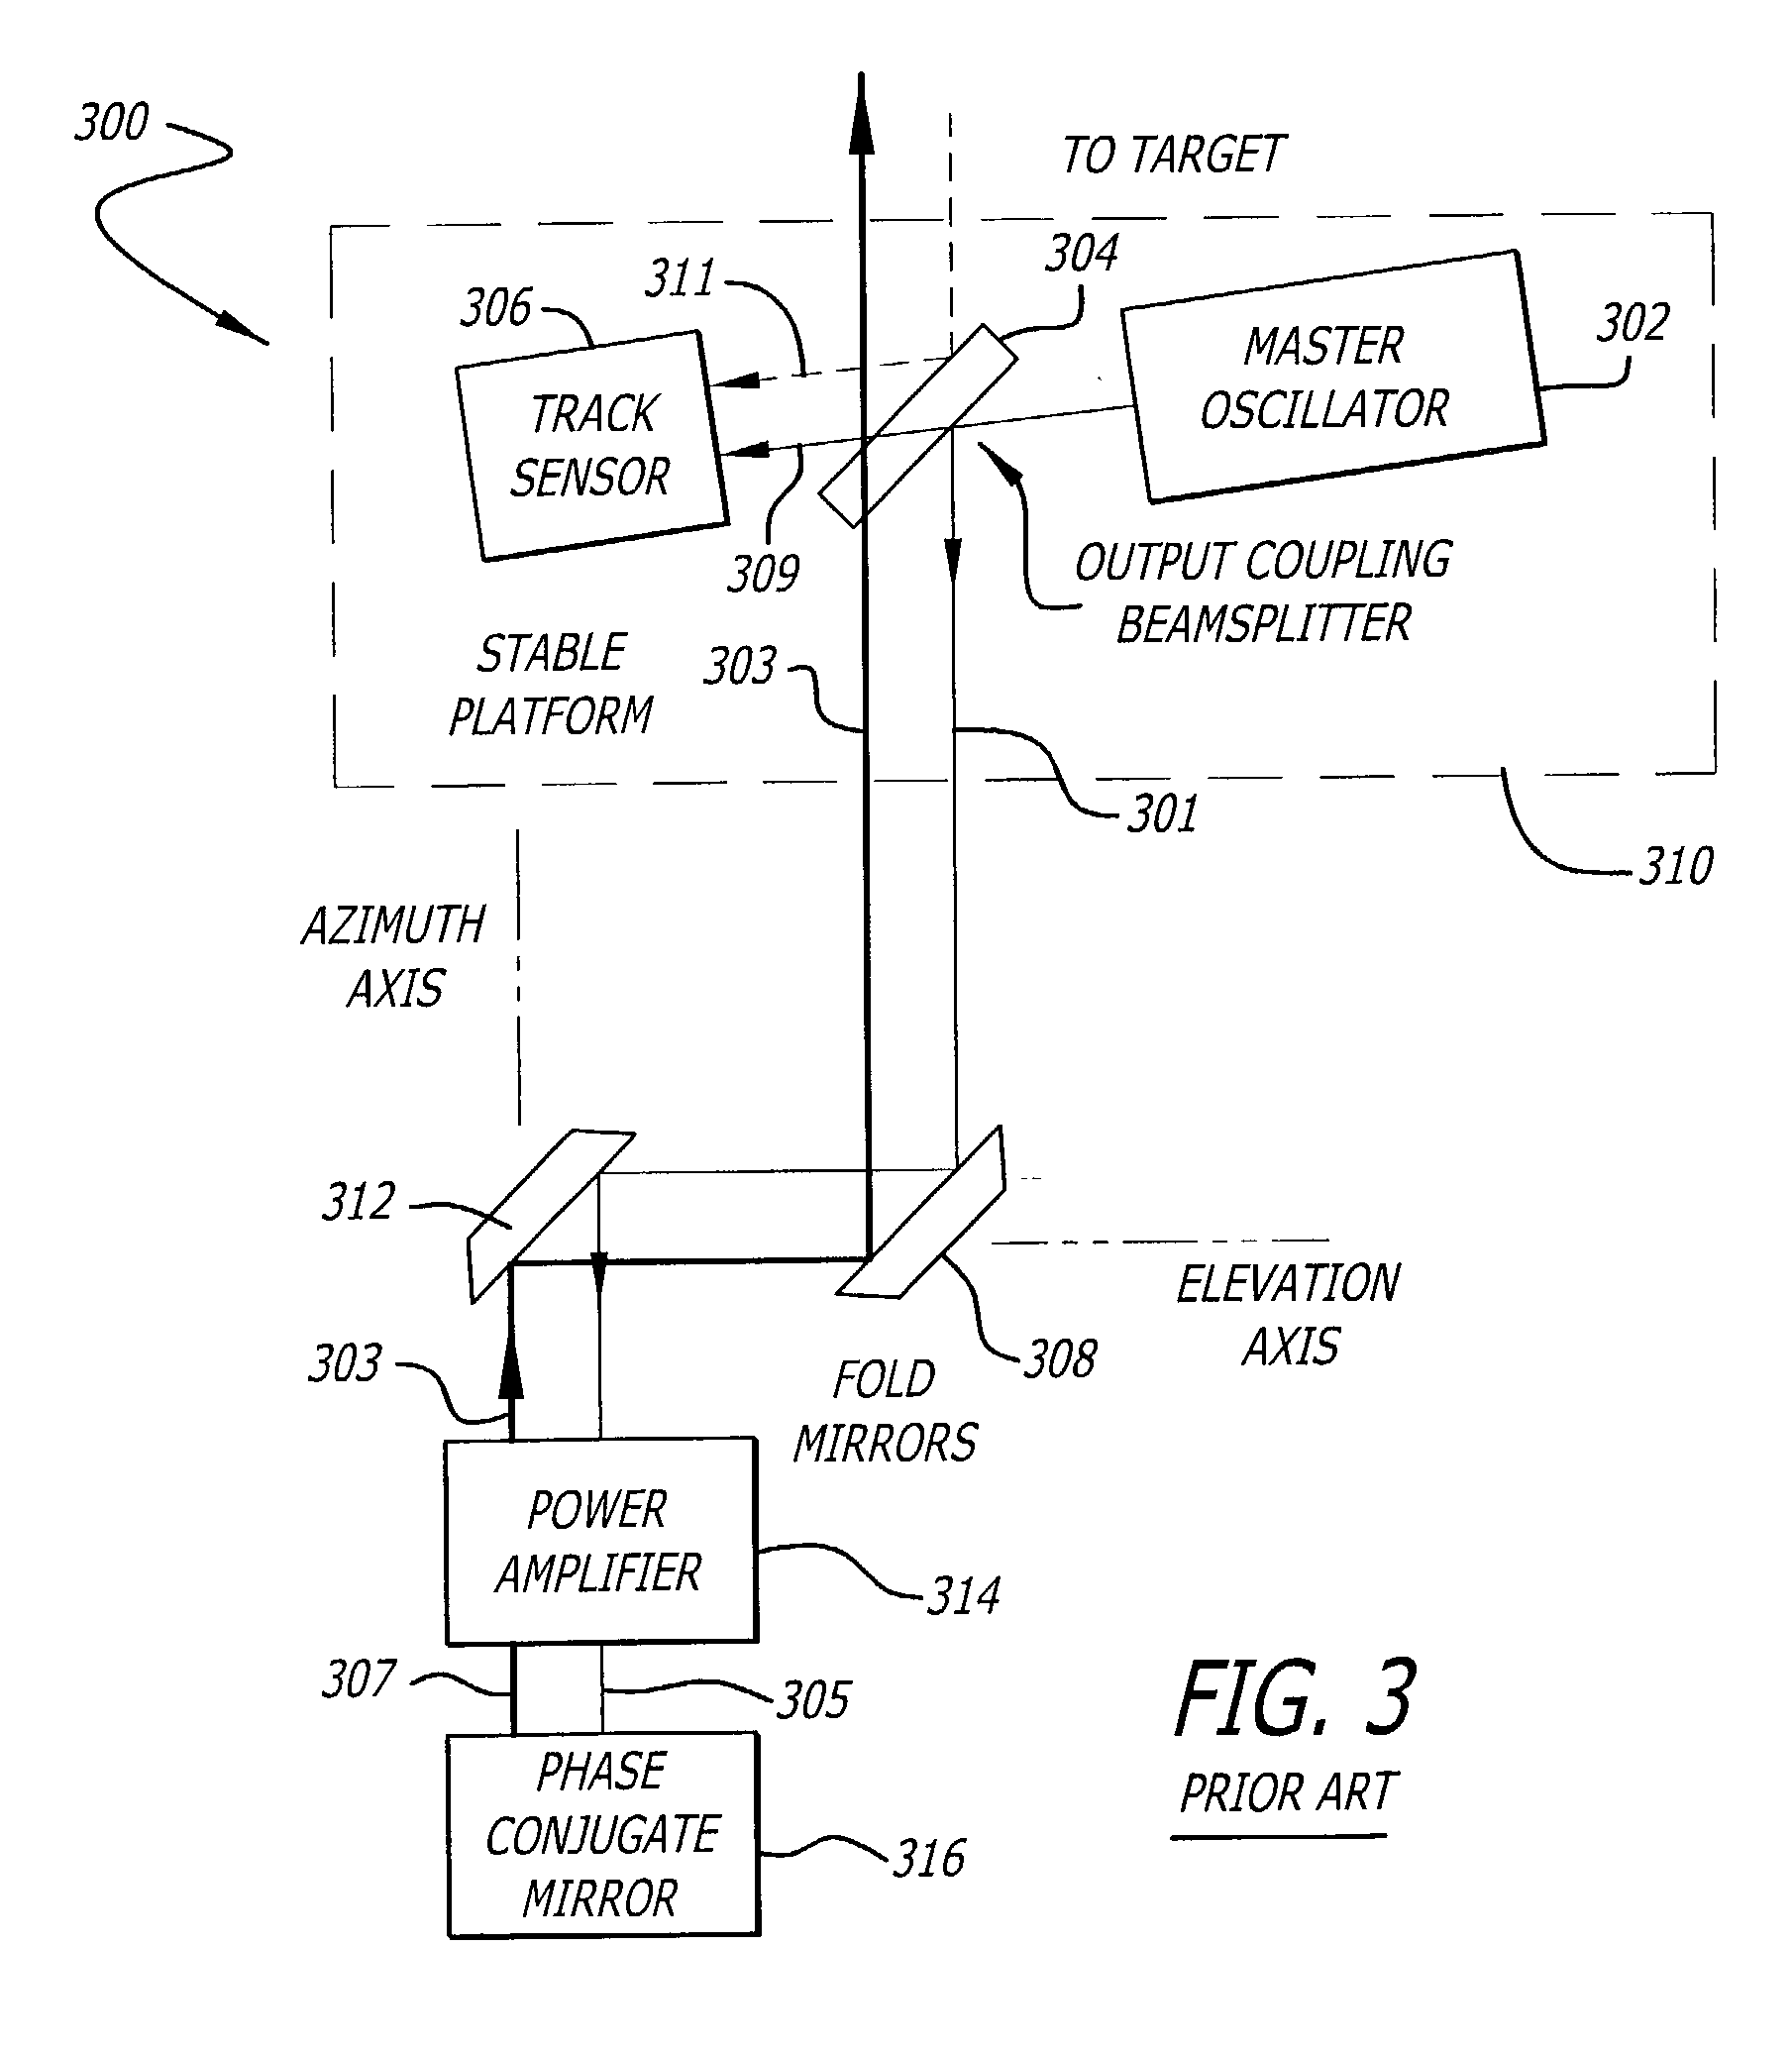 Phase conjugate relay mirror apparatus for high energy laser system and method